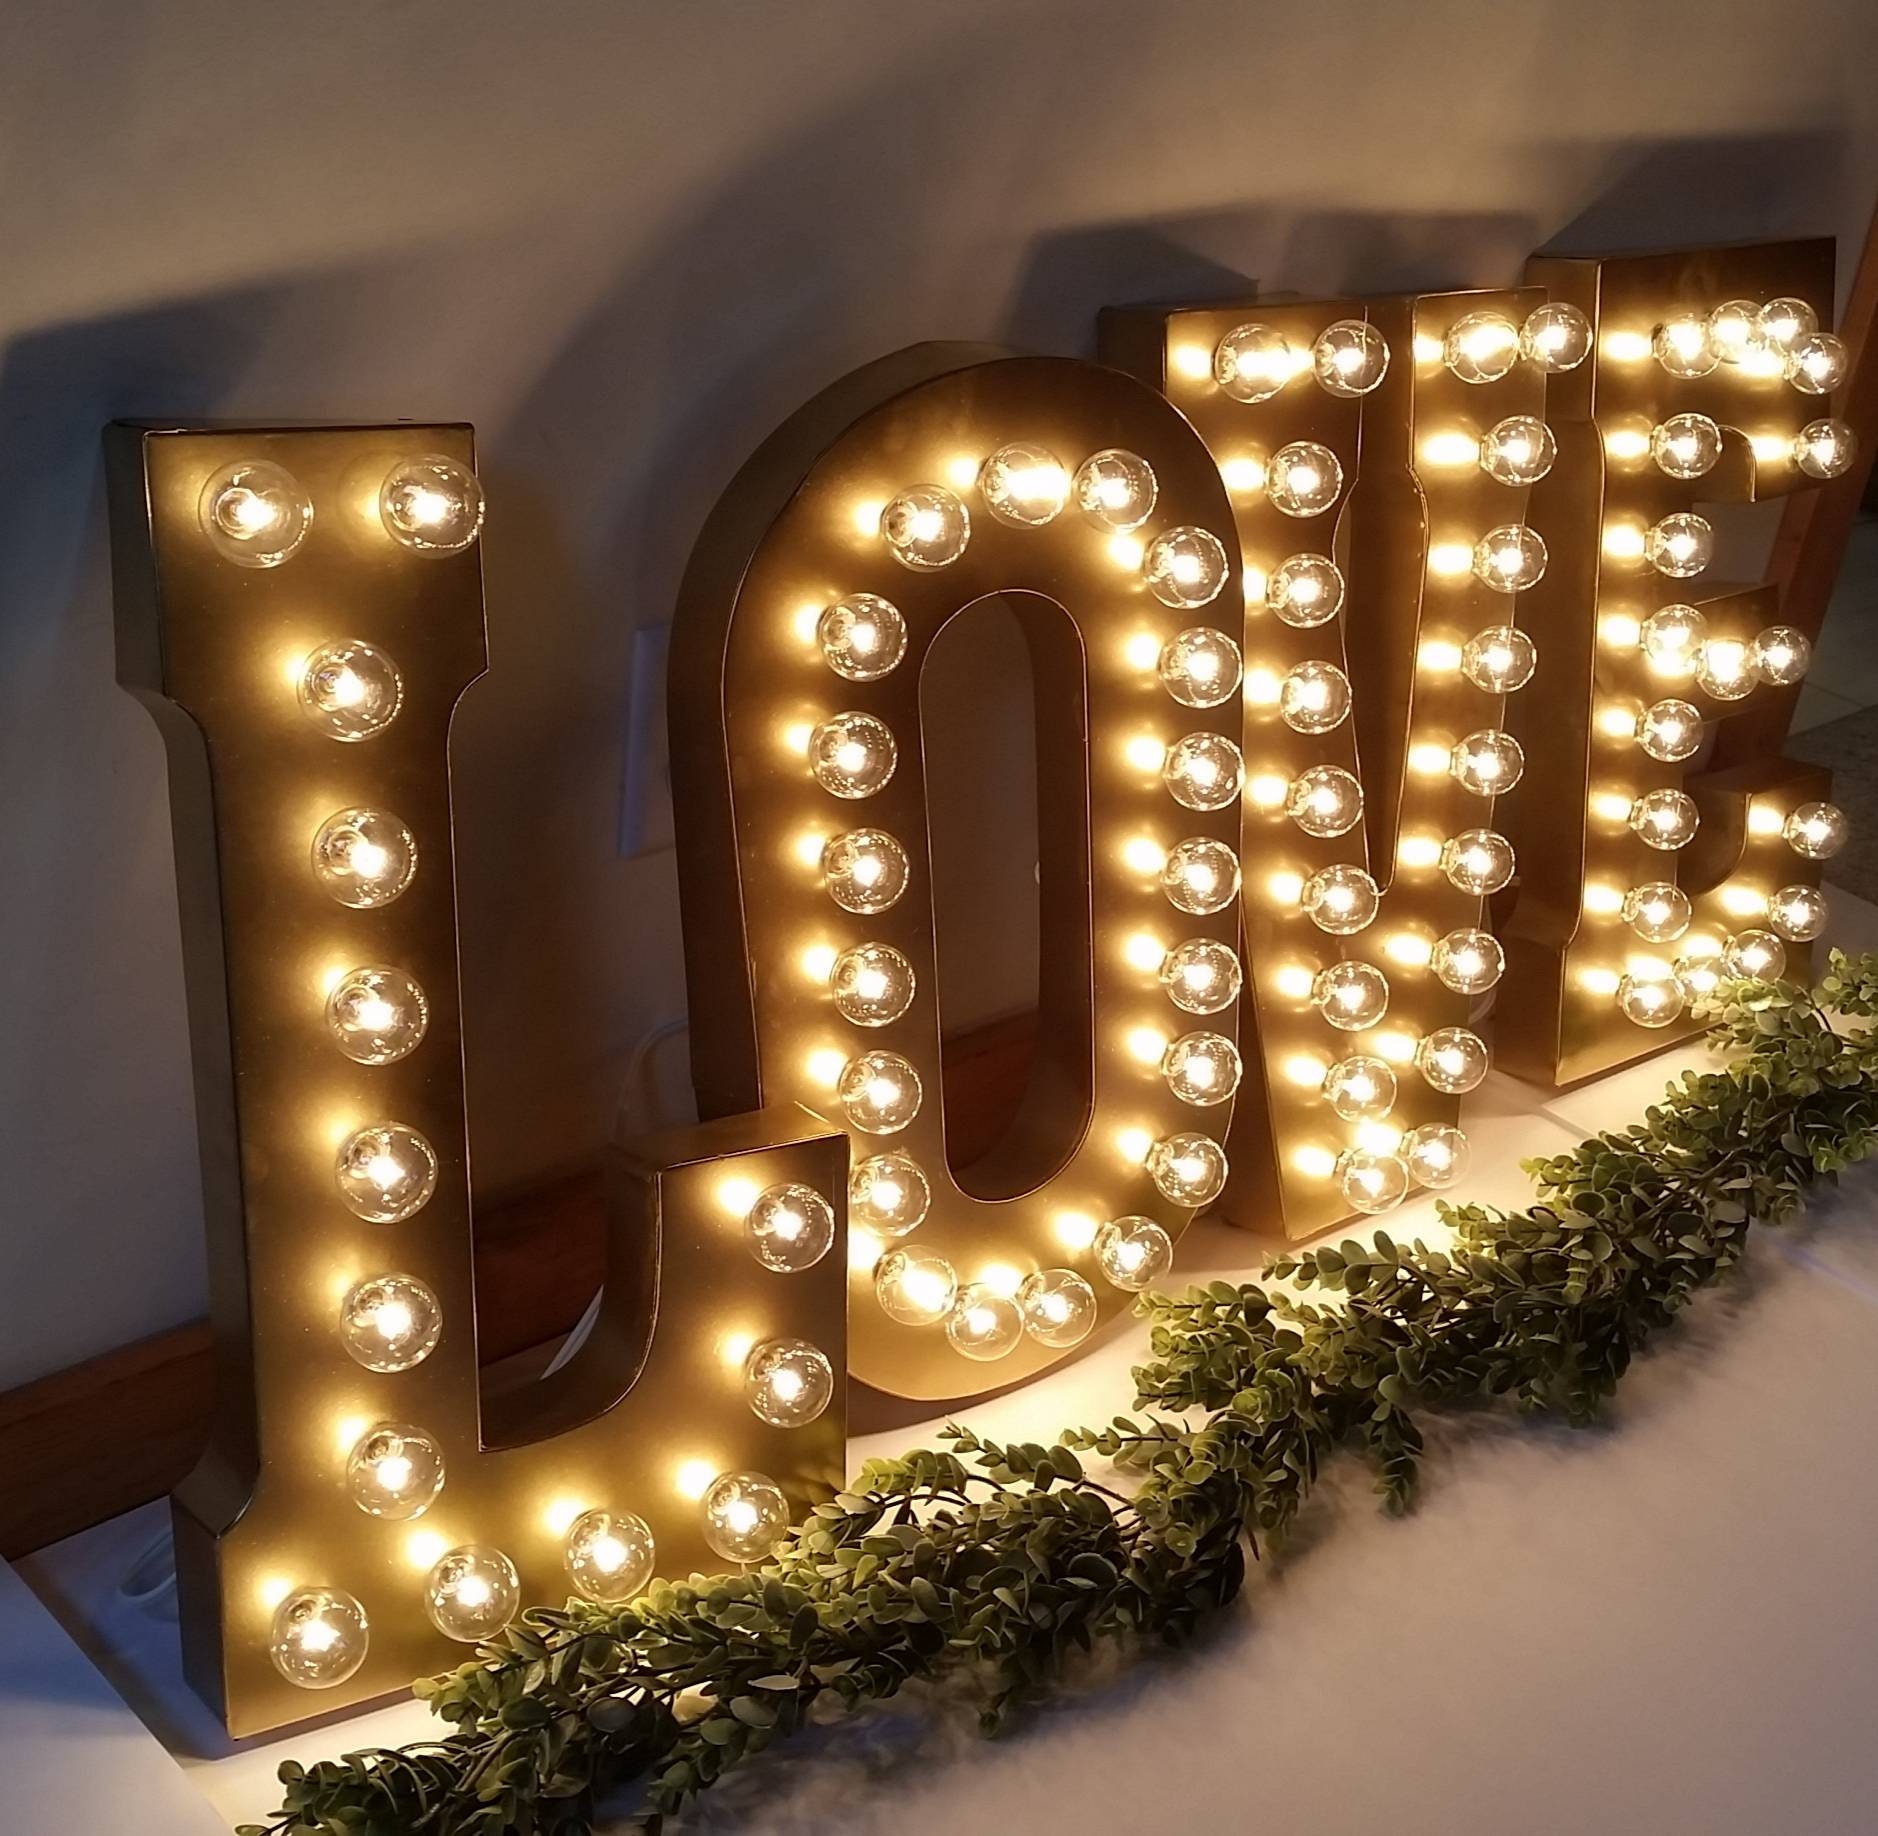 6" tall GOLD E LED Lighted Marquee Letters Sign Party Wedding Events Decorations 